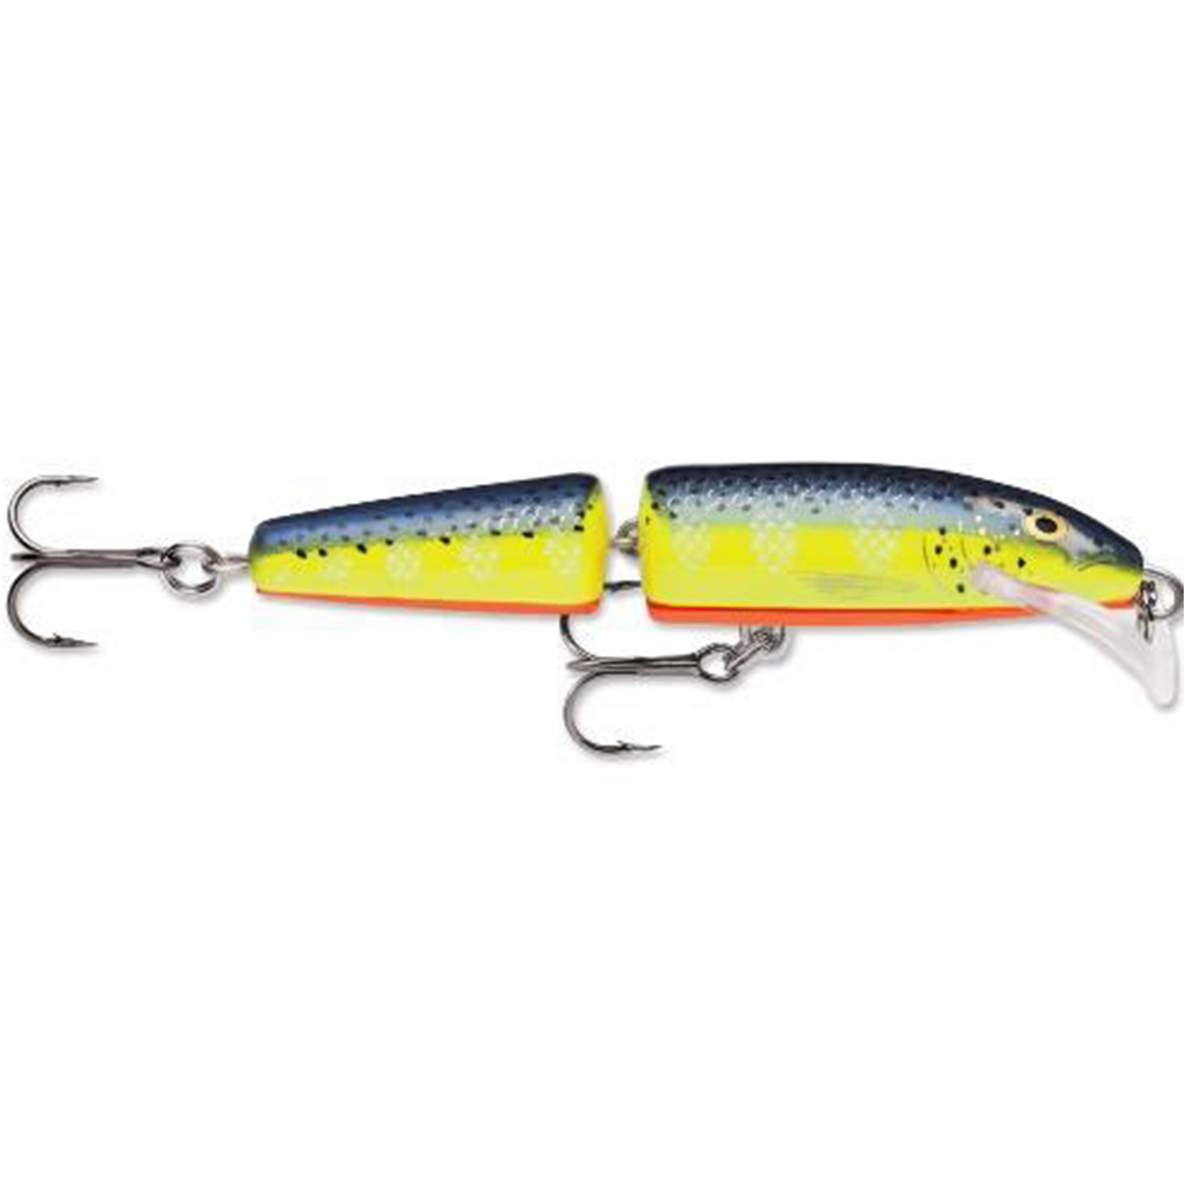 Rapala Jointed Scatter Rap